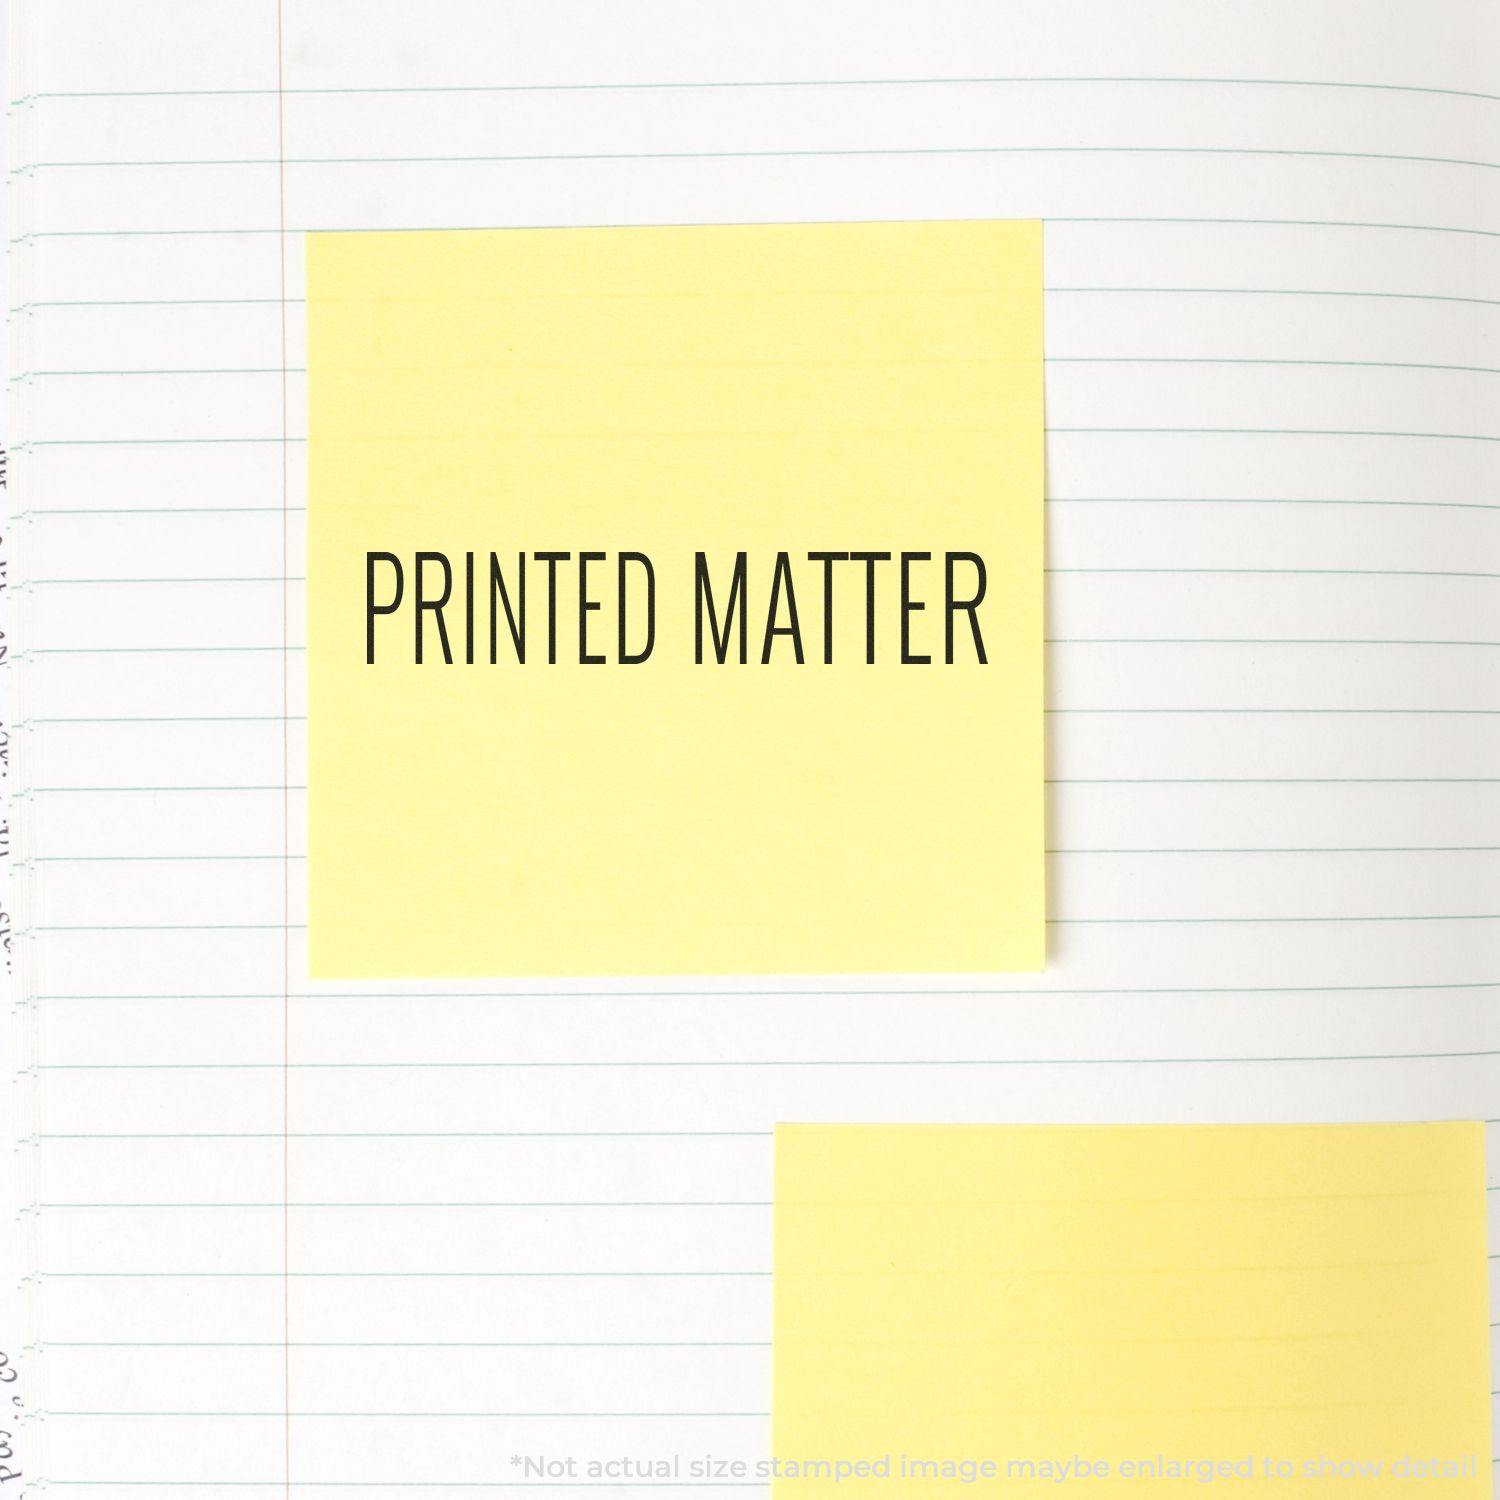 A stock office rubber stamp with a stamped image showing how the text "PRINTED MATTER" in a large font is displayed after stamping.